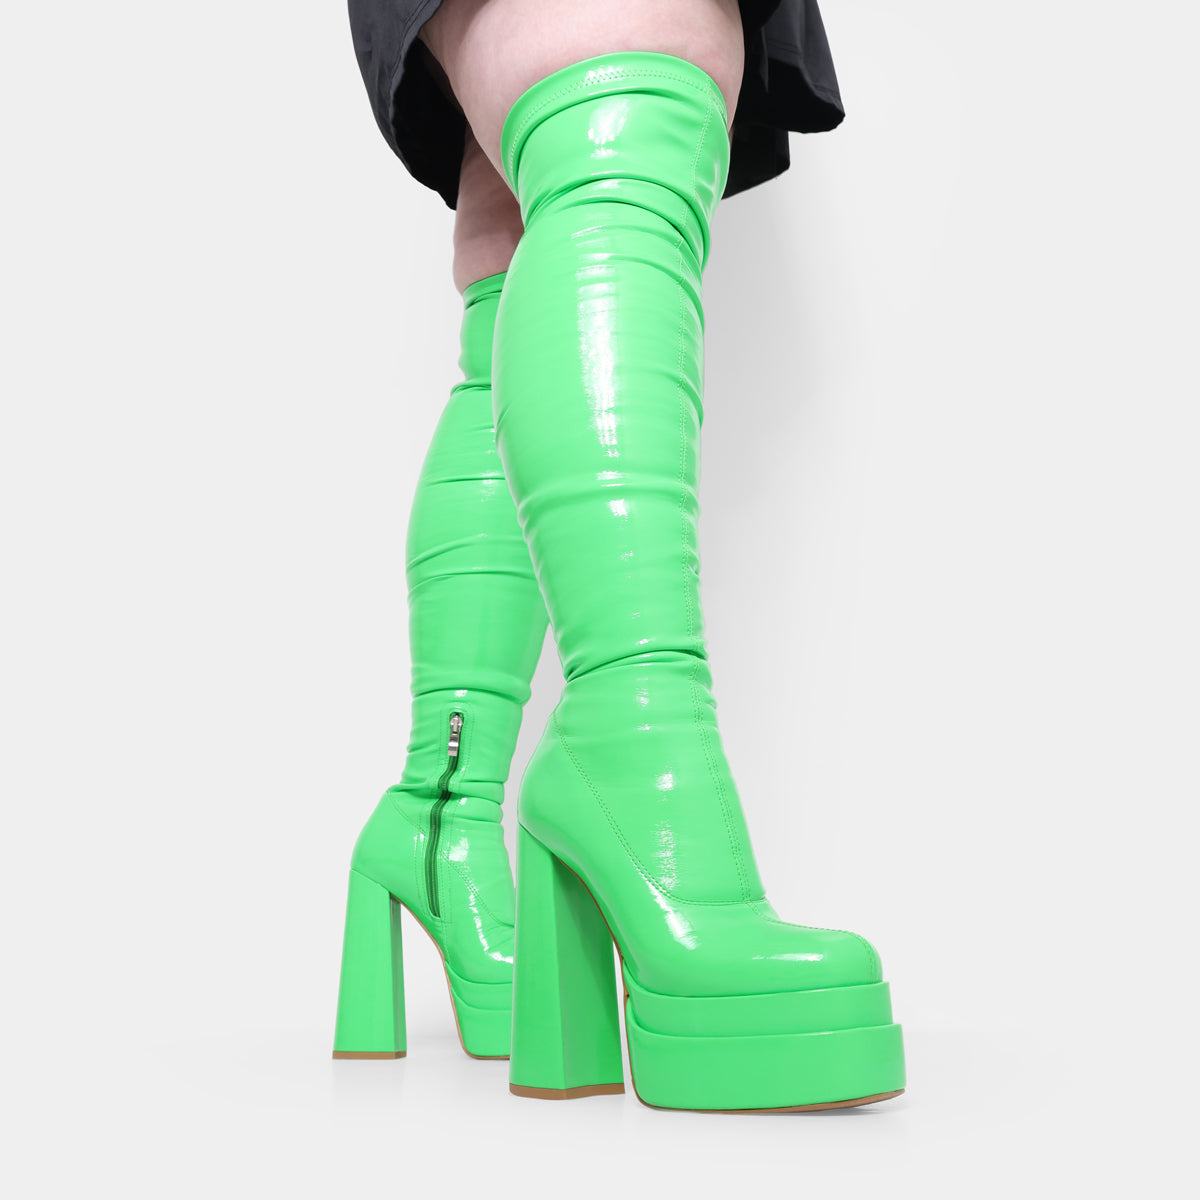 The Redemption Green Stretch Thigh High Boots - Long Boots - KOI Footwear - Green - Model View